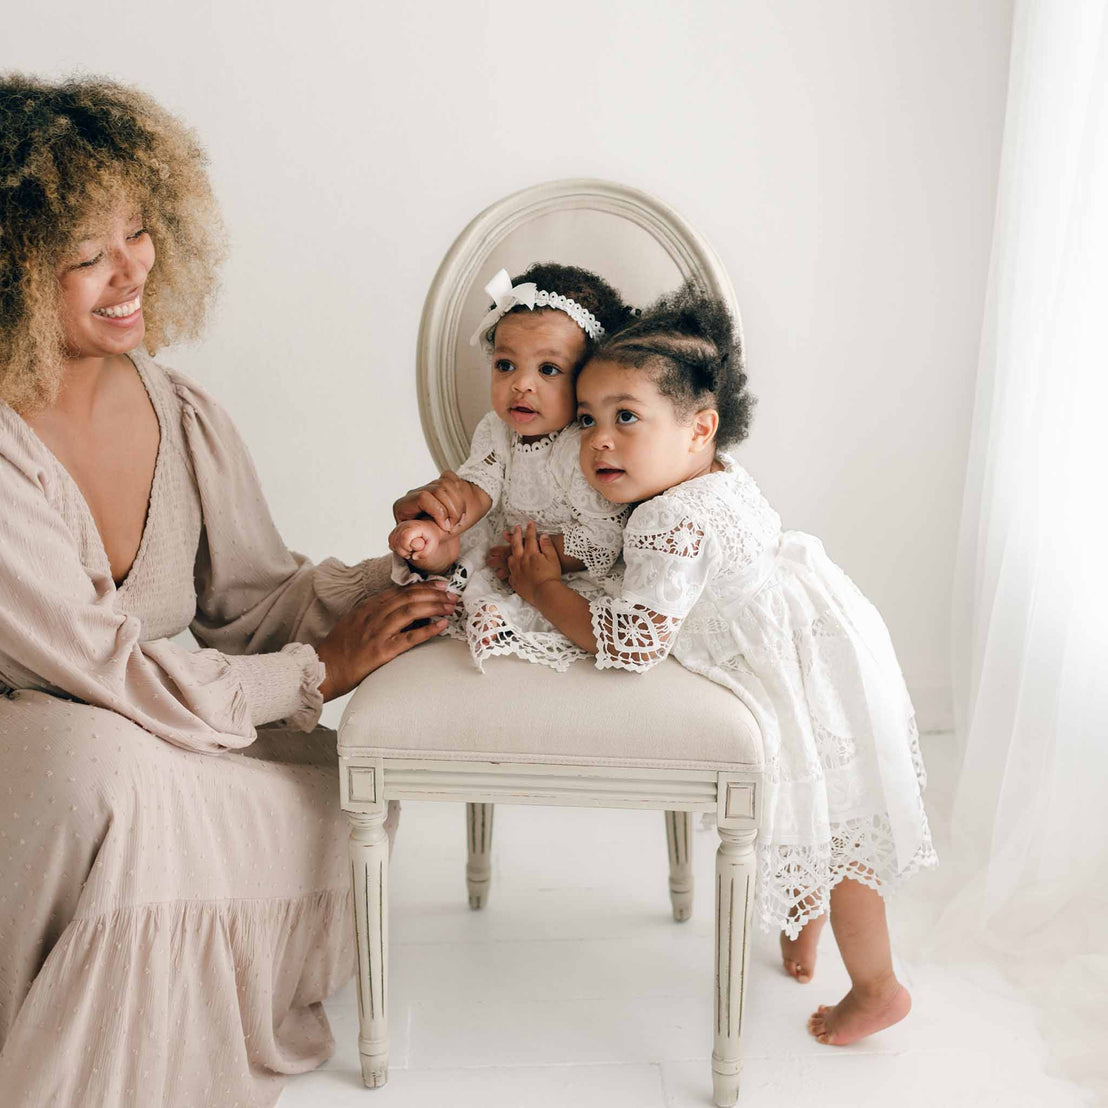 A woman with curly hair smiles at two young children dressed in Adeline Lace Dress & Bloomers. One child sits on a cream-colored chair, while the other stands beside it, looking away. The room features a bright, clean aesthetic with minimalistic white decor.